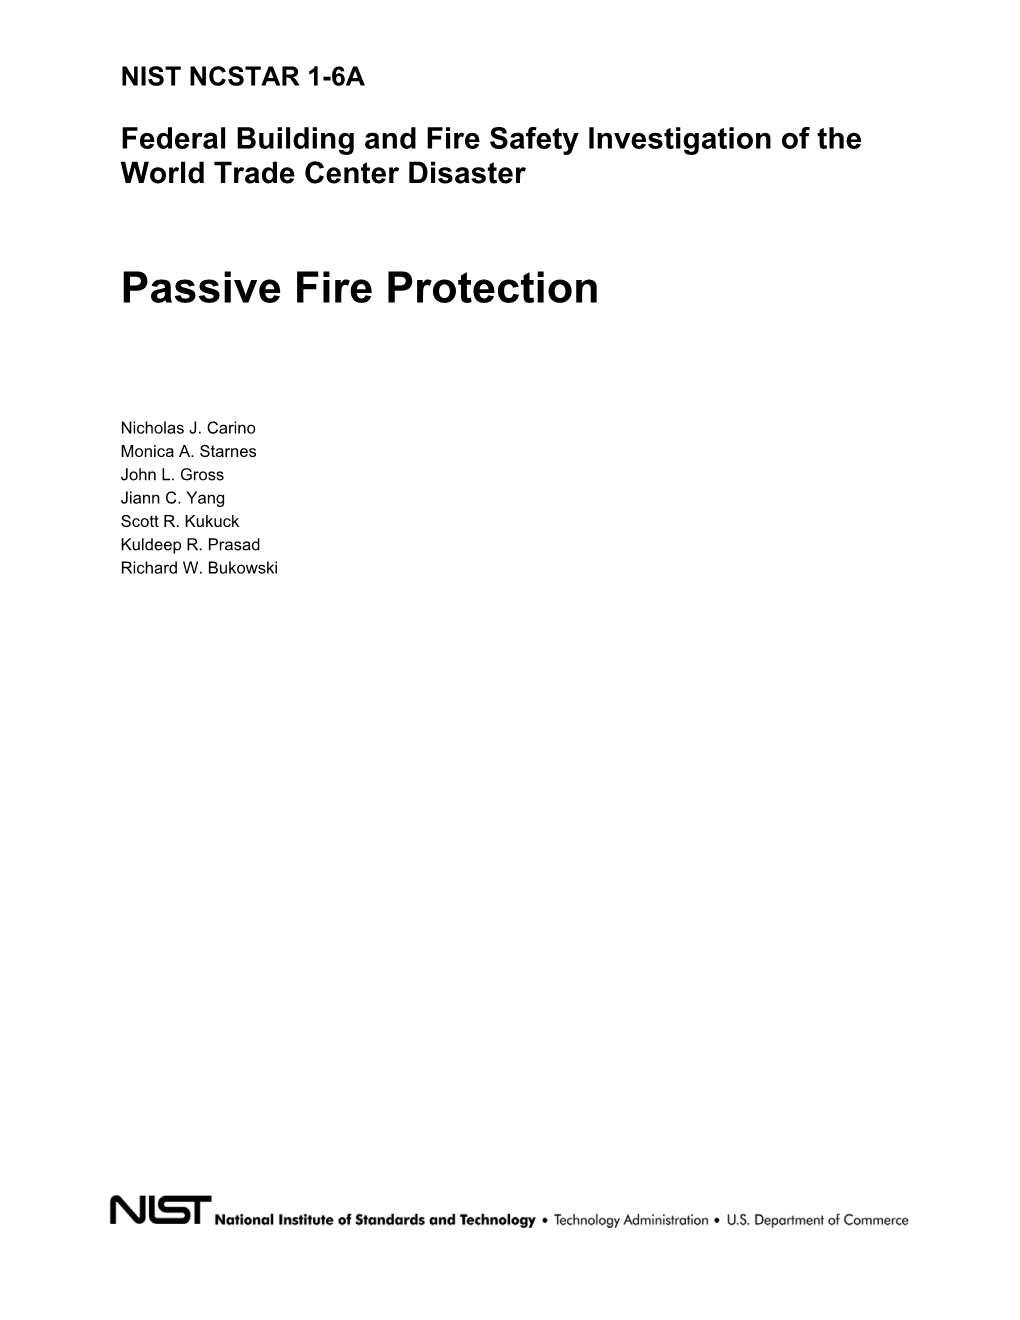 Passive Fire Protection